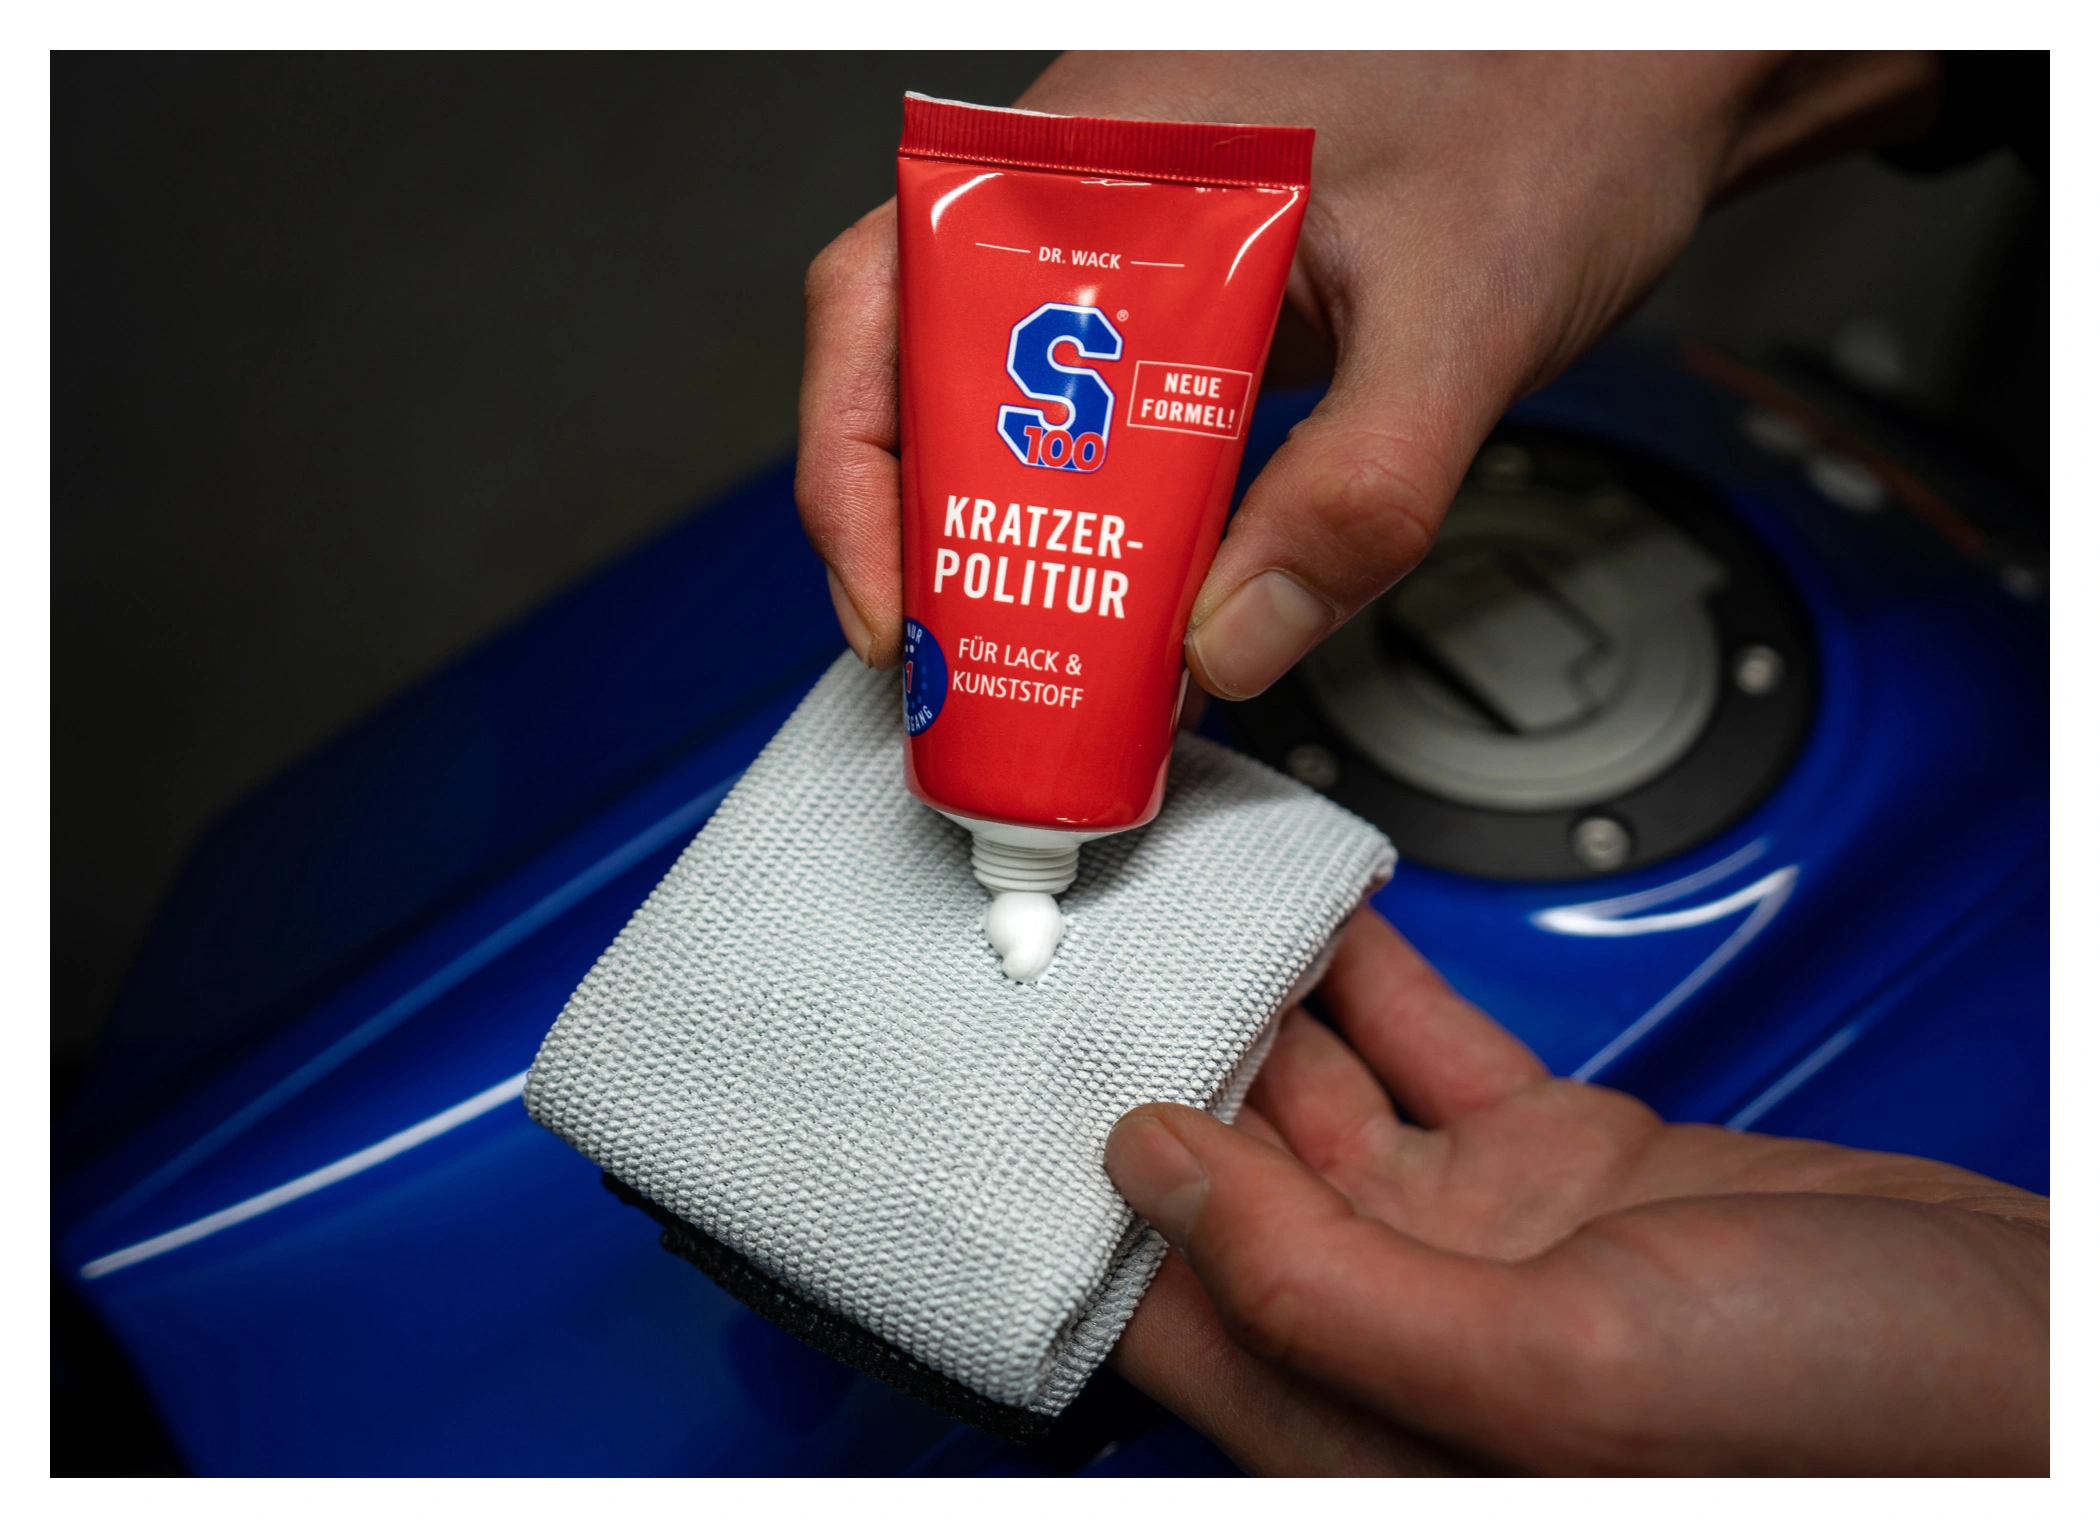 S100 SCRATCH REMOVER